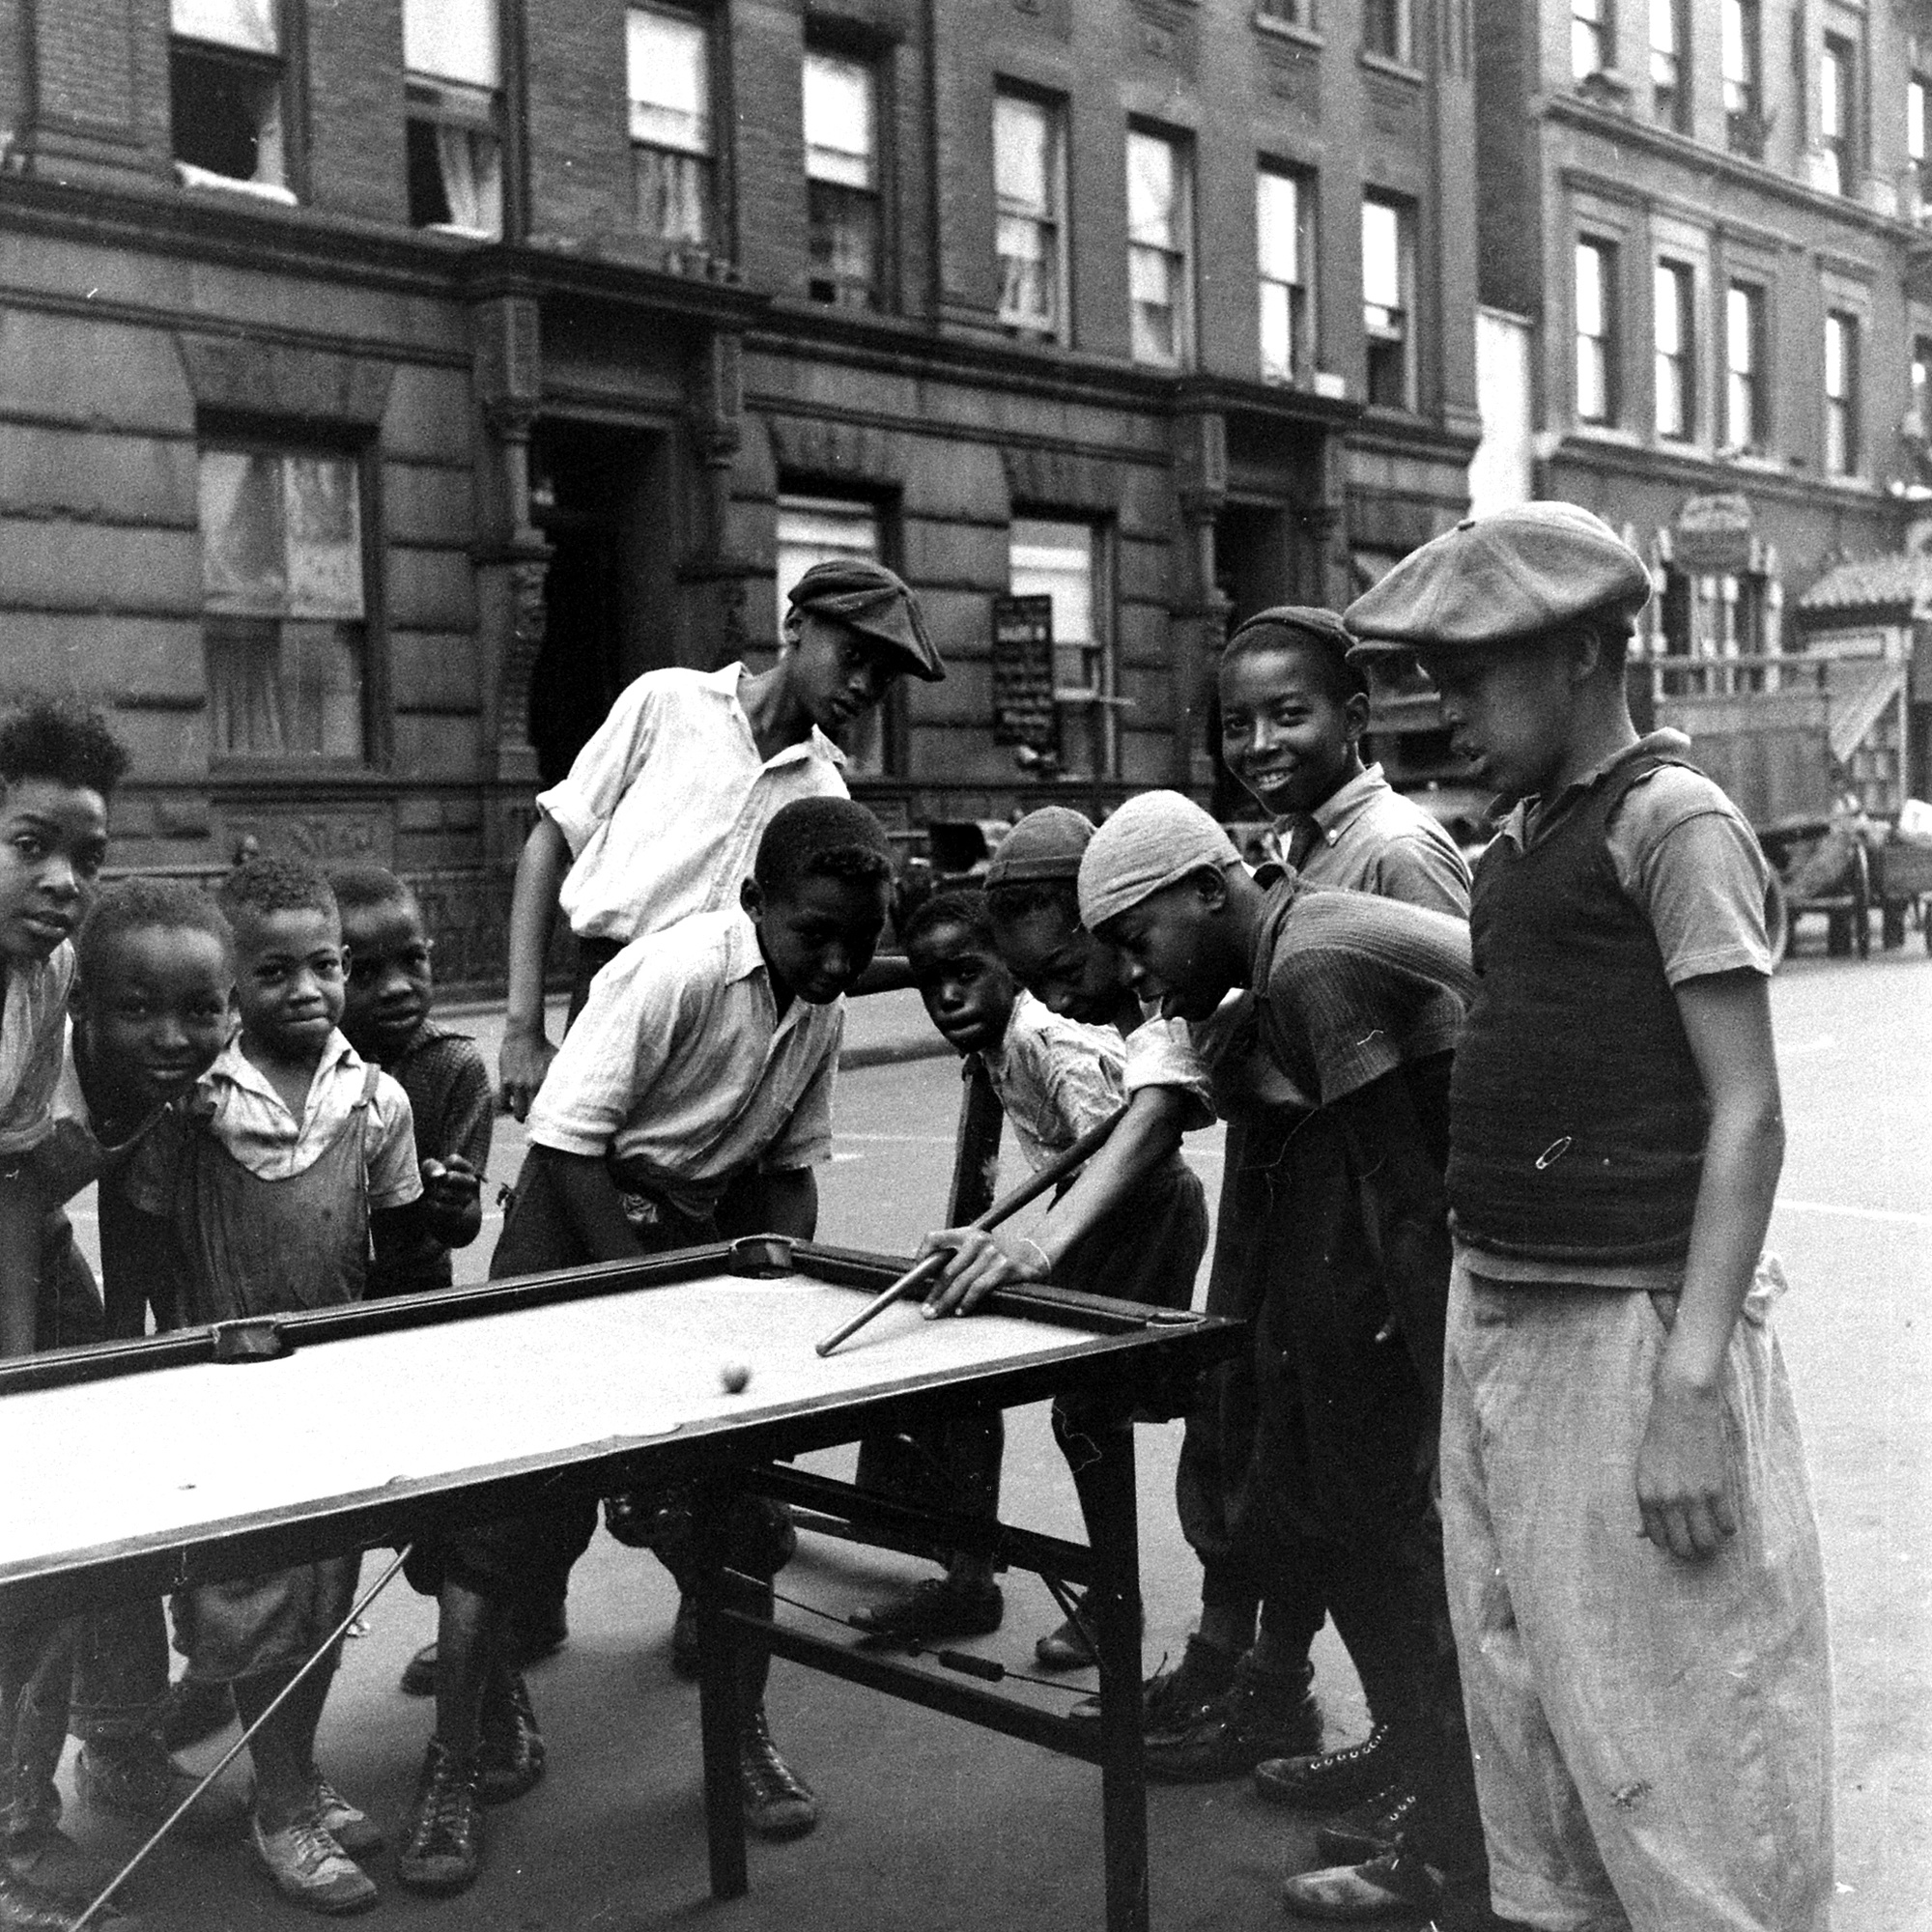 1938: A group of boys in Harlem enjoy a game of pool with a makeshift set-up.